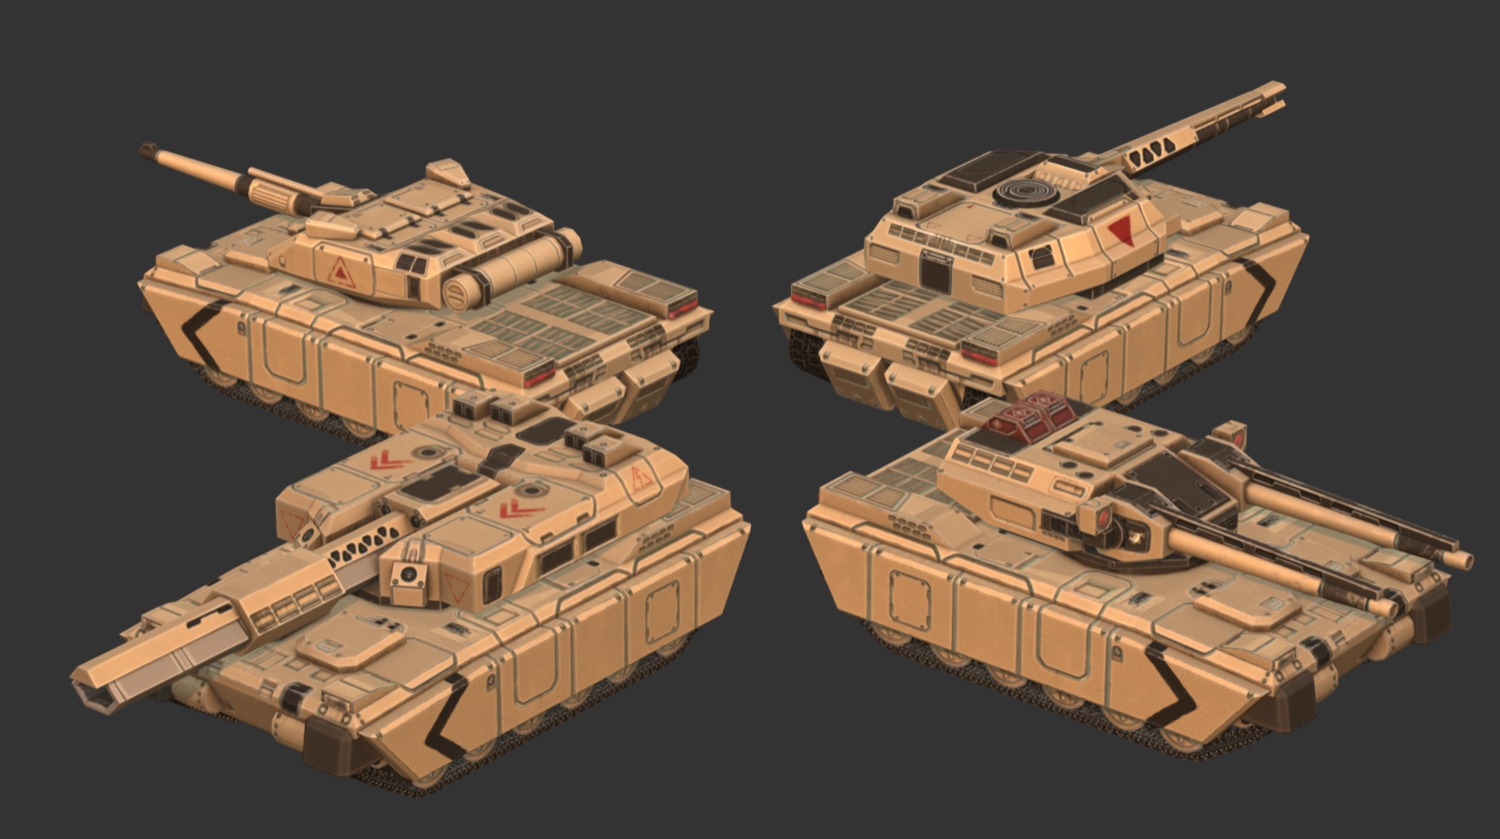 A commissioned model of a fictional sci-fi tank. My commissioner wanted 4 different turrets, a standard turret, a double turret, a heavy turret, and a railgun.

Made with 3DSMax and Substance Painter 3d model